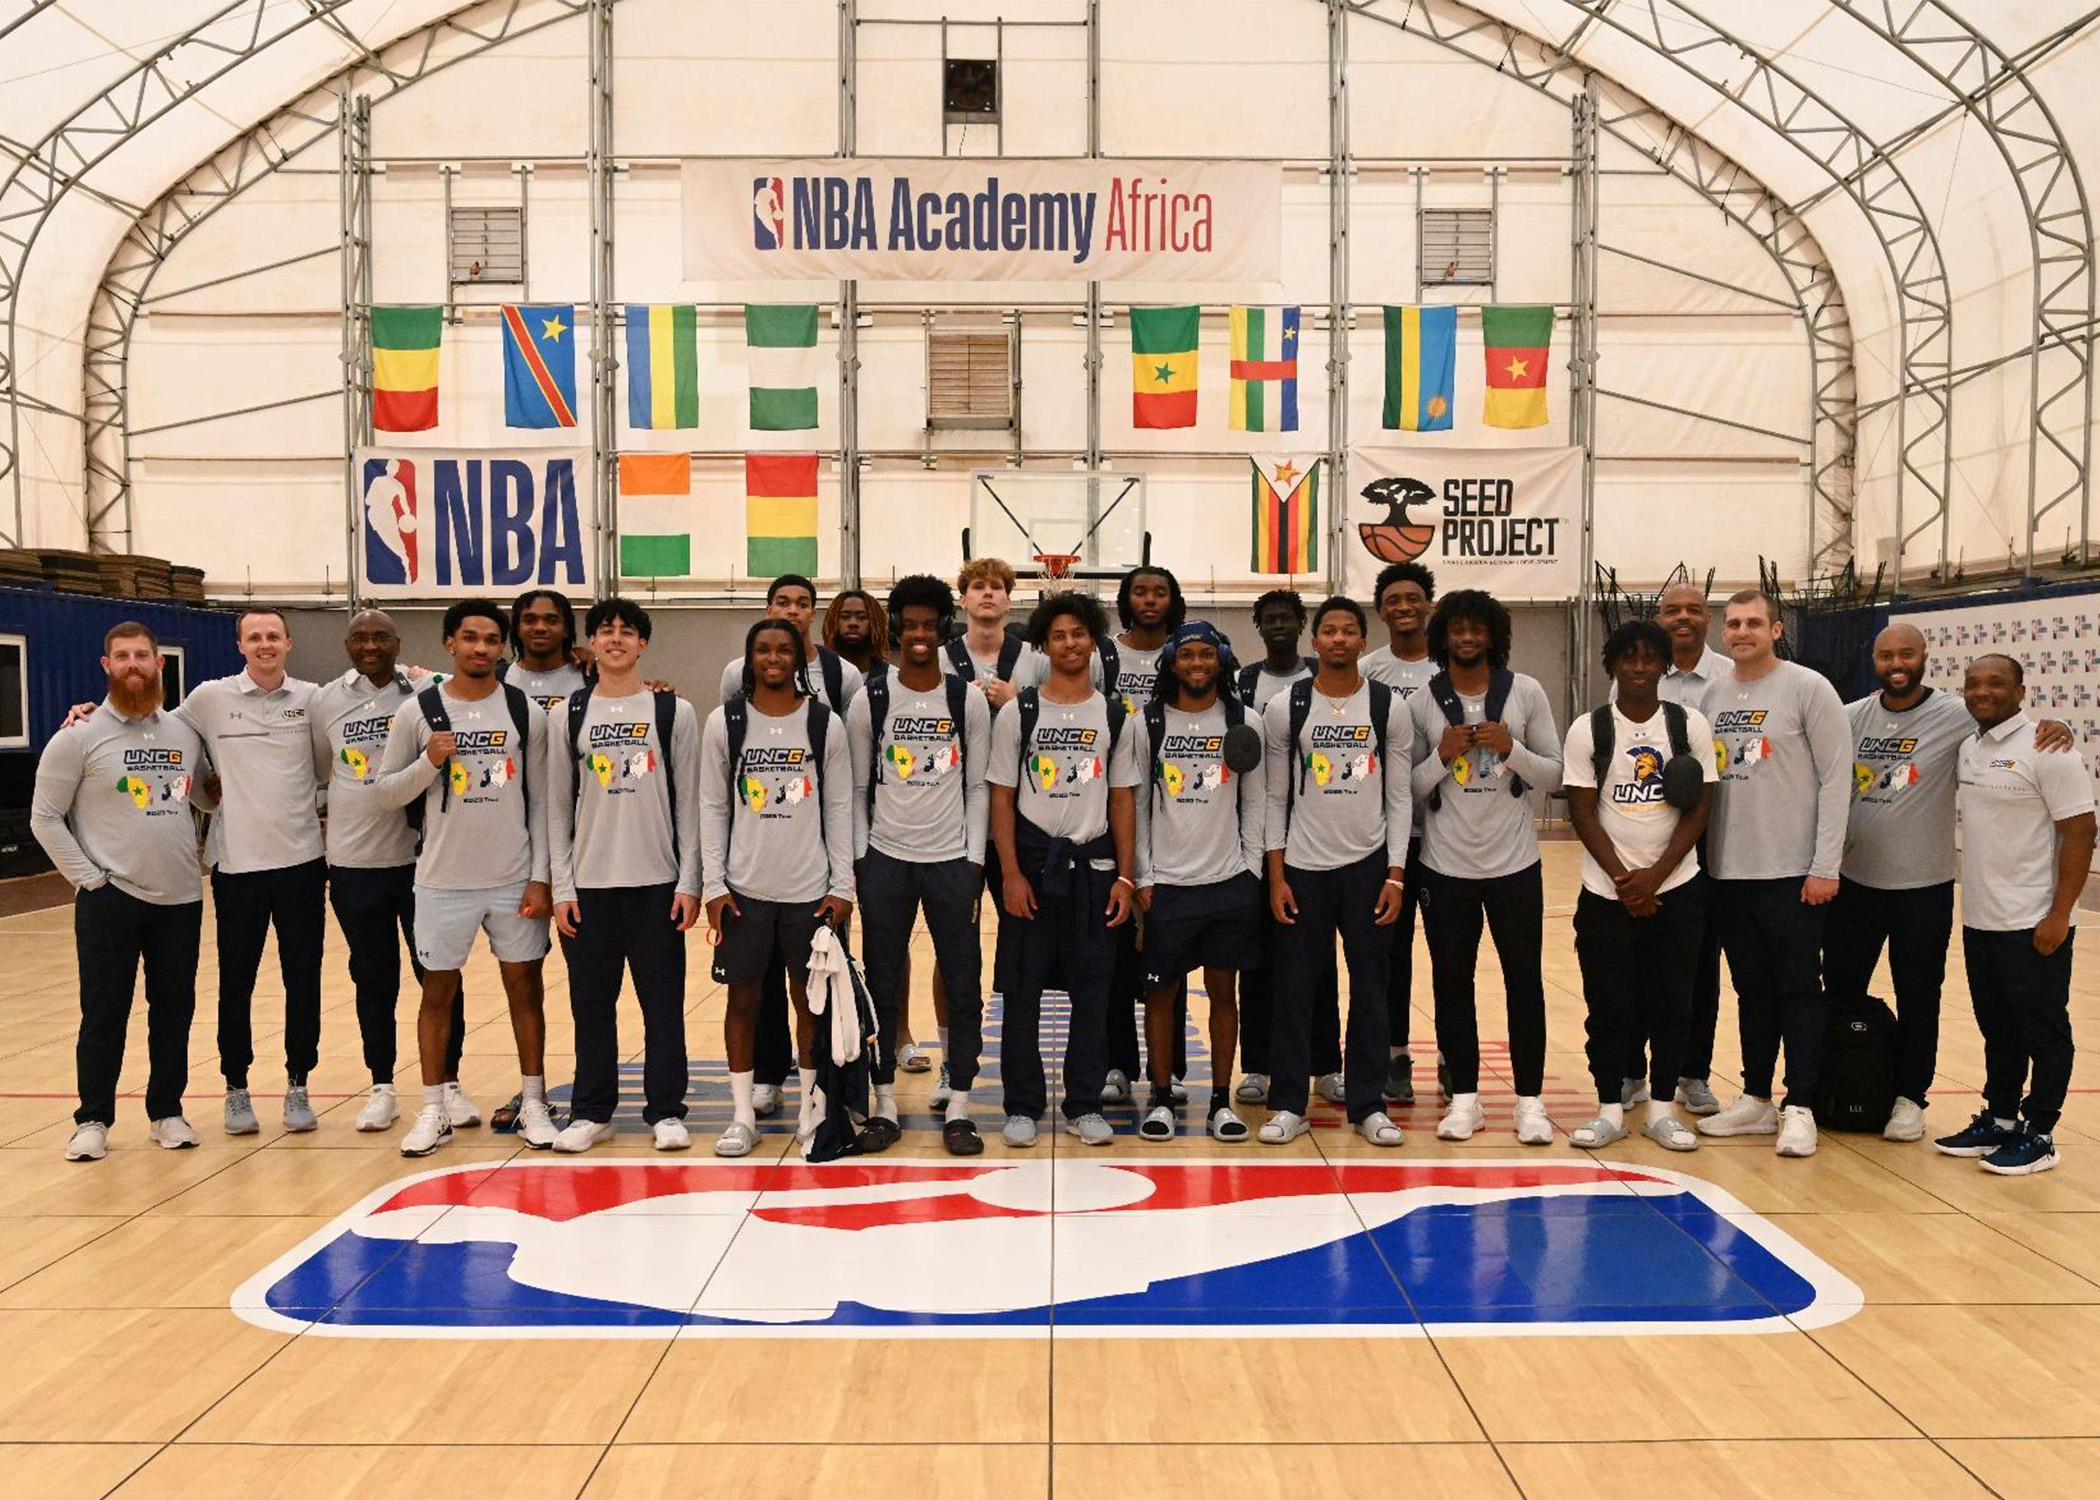 NBA Academy Africa, SEED Project